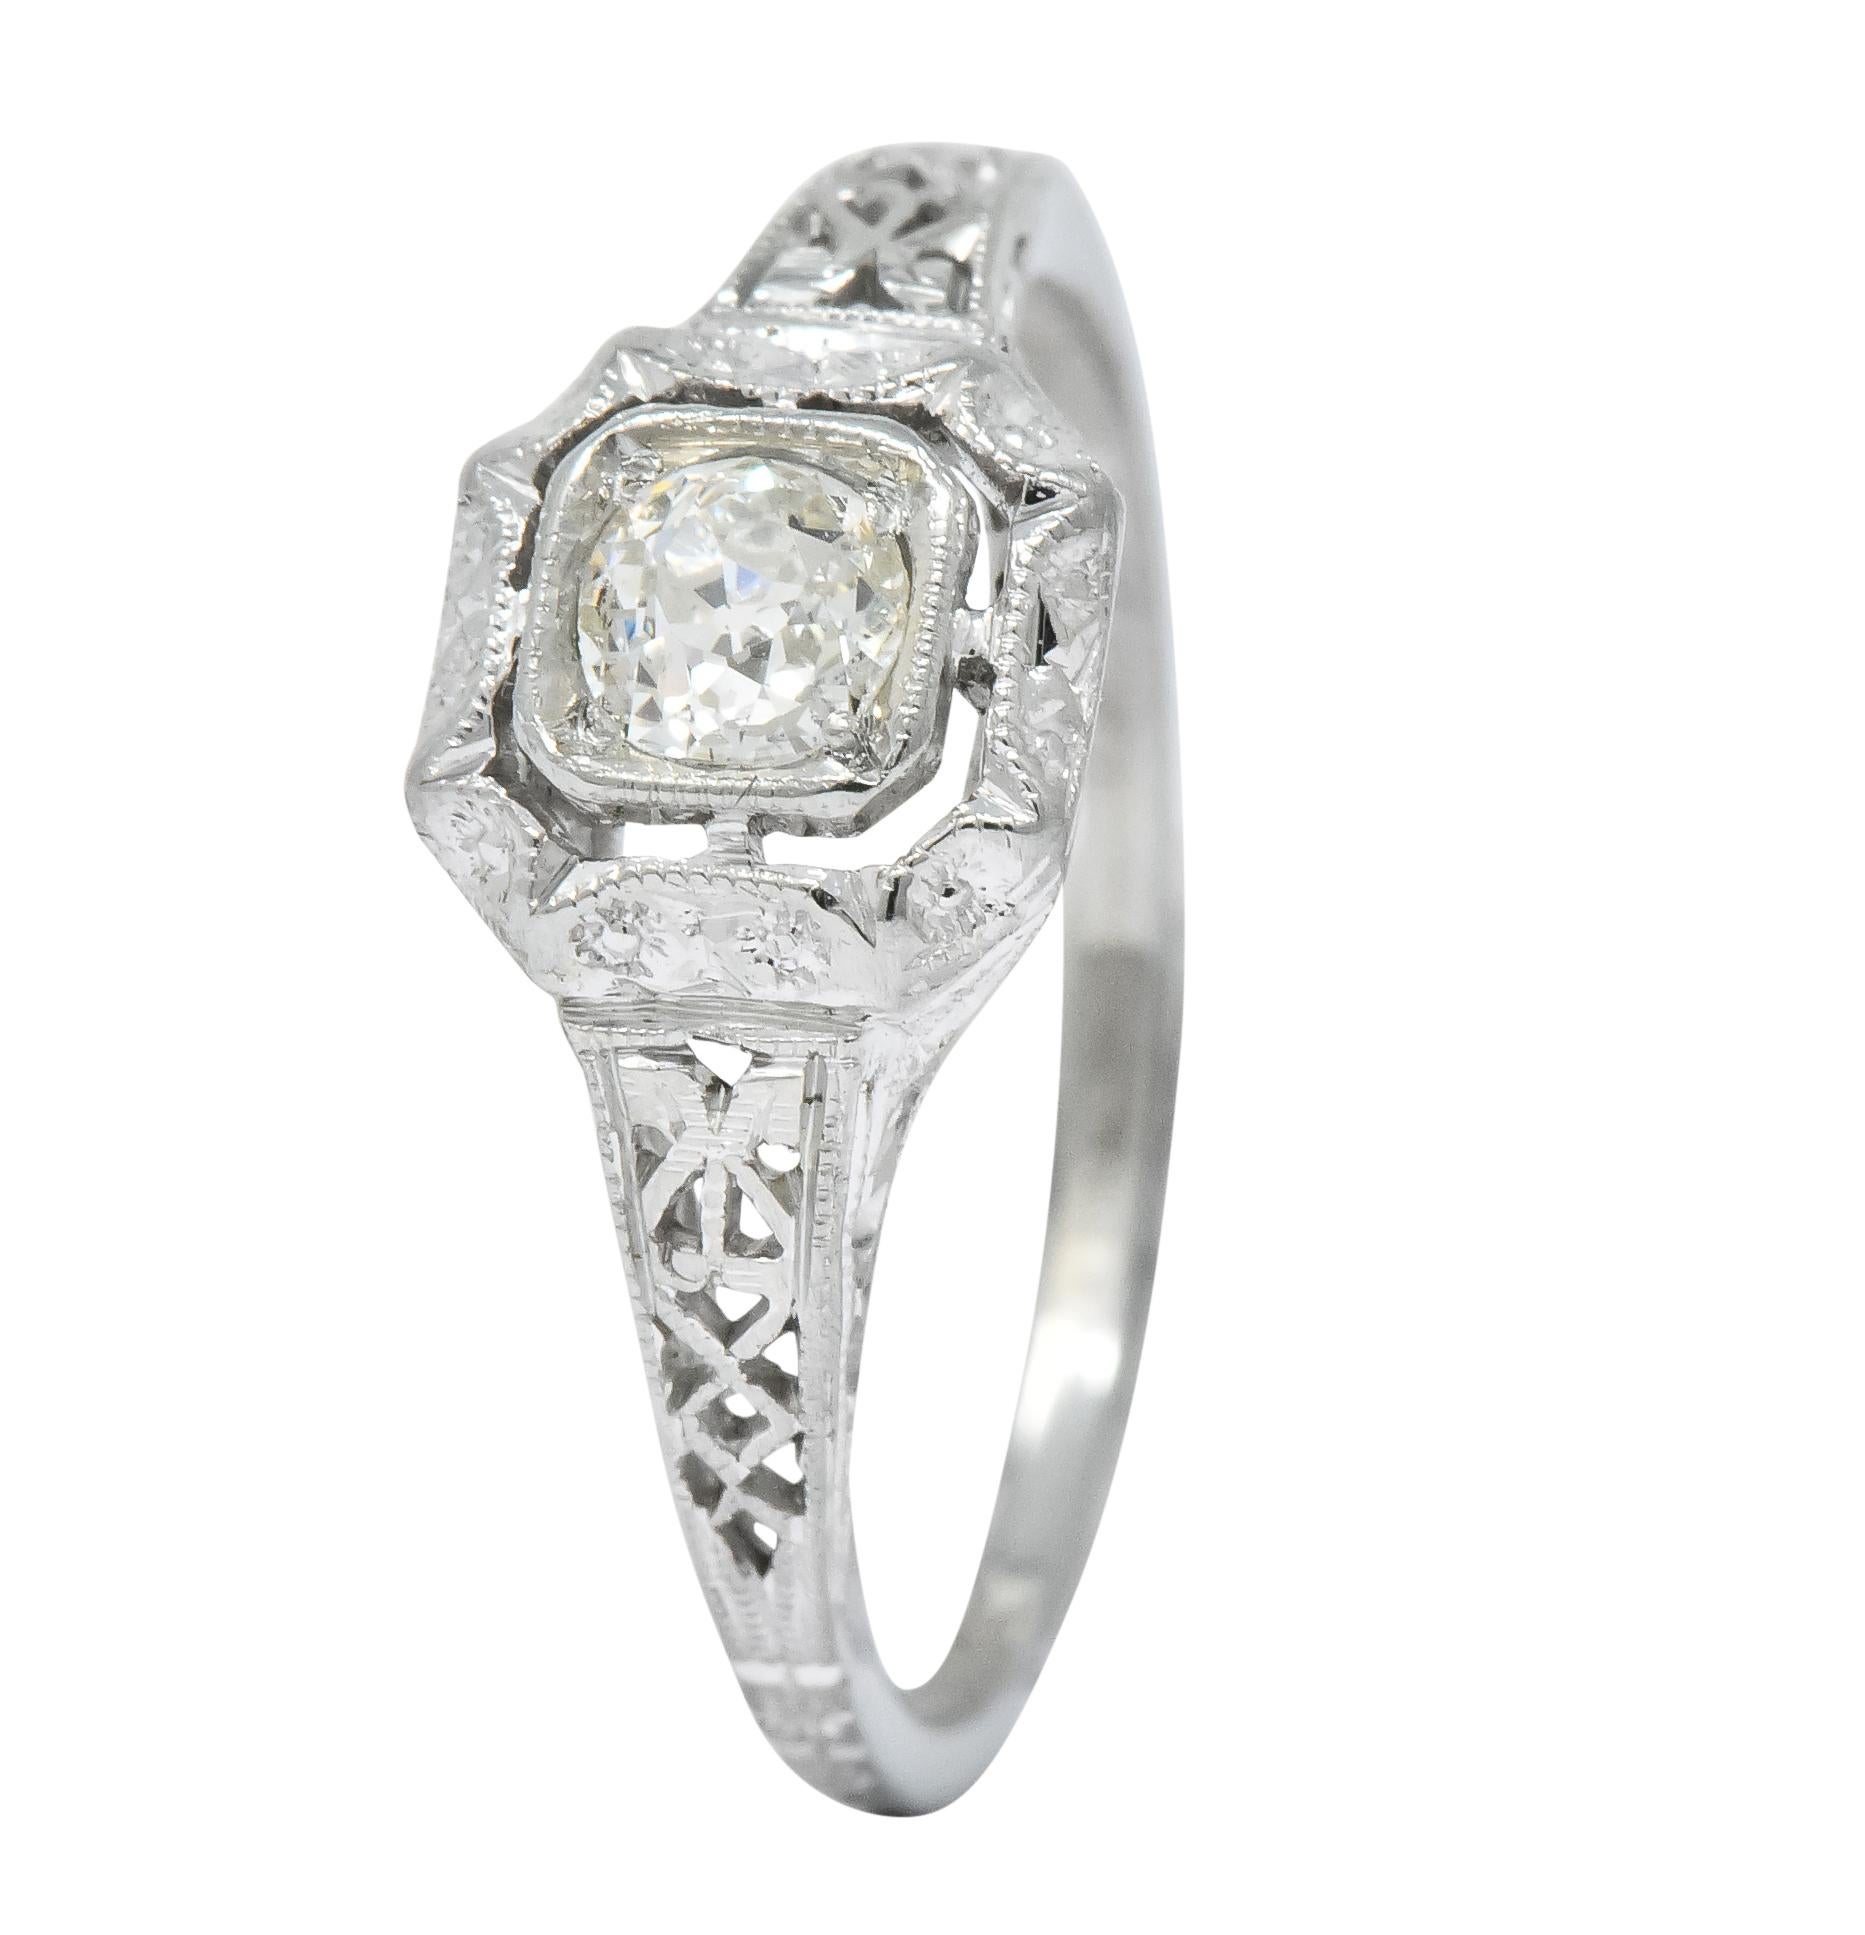 Centering an old European cut diamond weighing 0.23 carat I color and VS clarity

In a pierced square form head and shoulders

With engraved floral detail

Fully signed Whiterose and stamped 18K

Ring Size: 6 & Sizable 

Circa 1915

Top measures 7.7